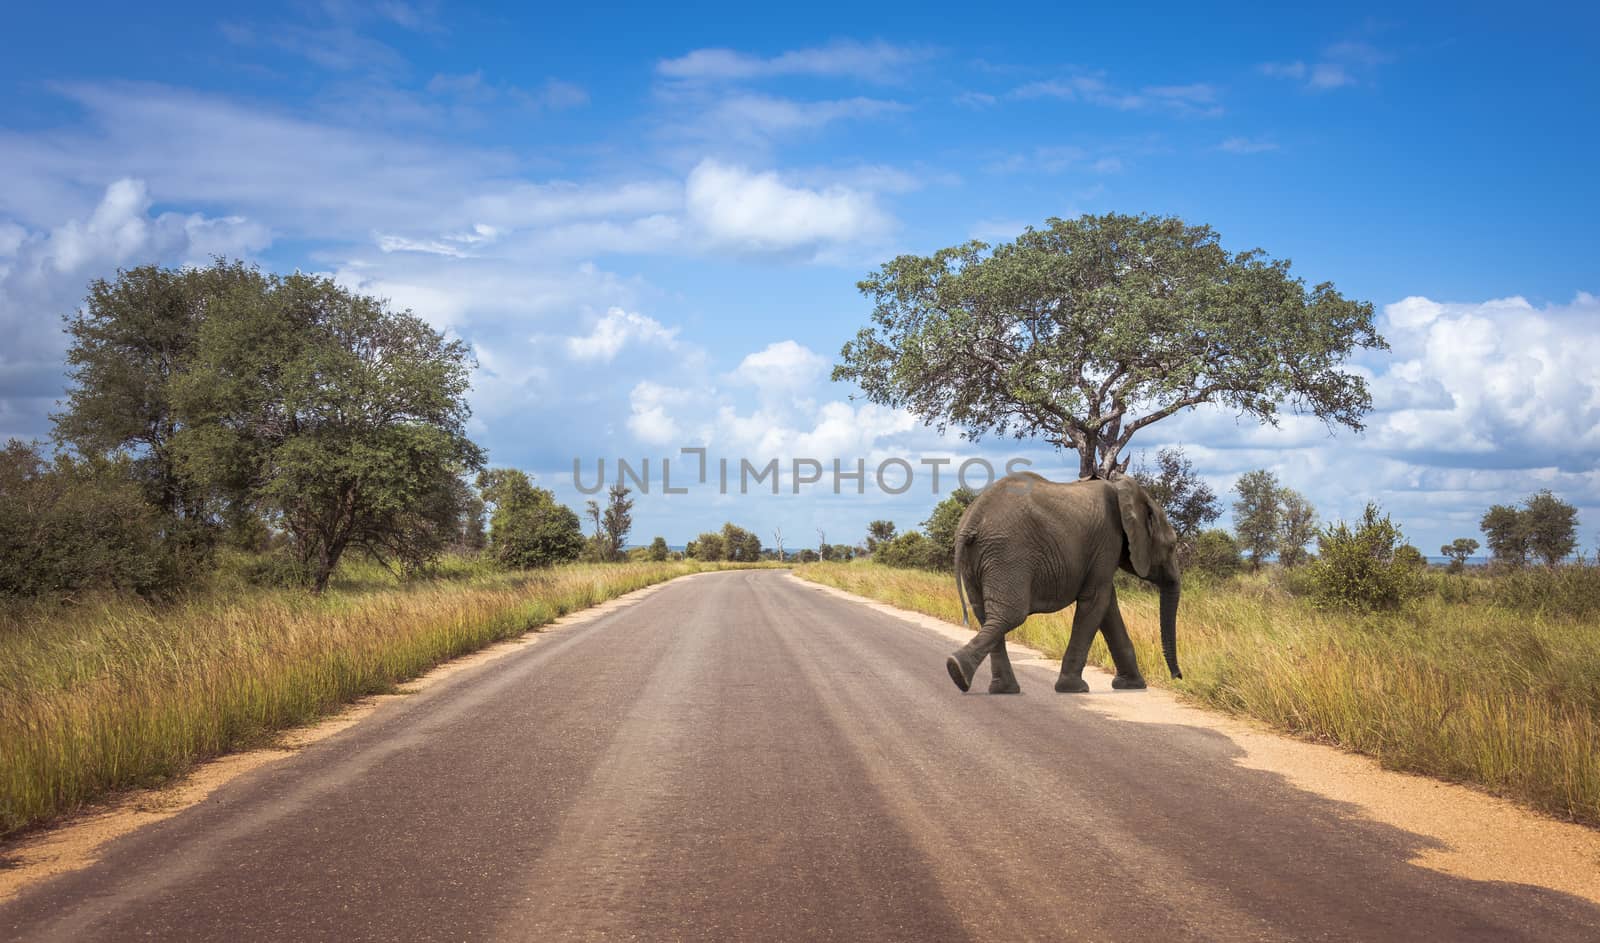 elephant crossing the road  in the wild nature of south africa in the kruger national park, looking for wild animals and beautifull landscape